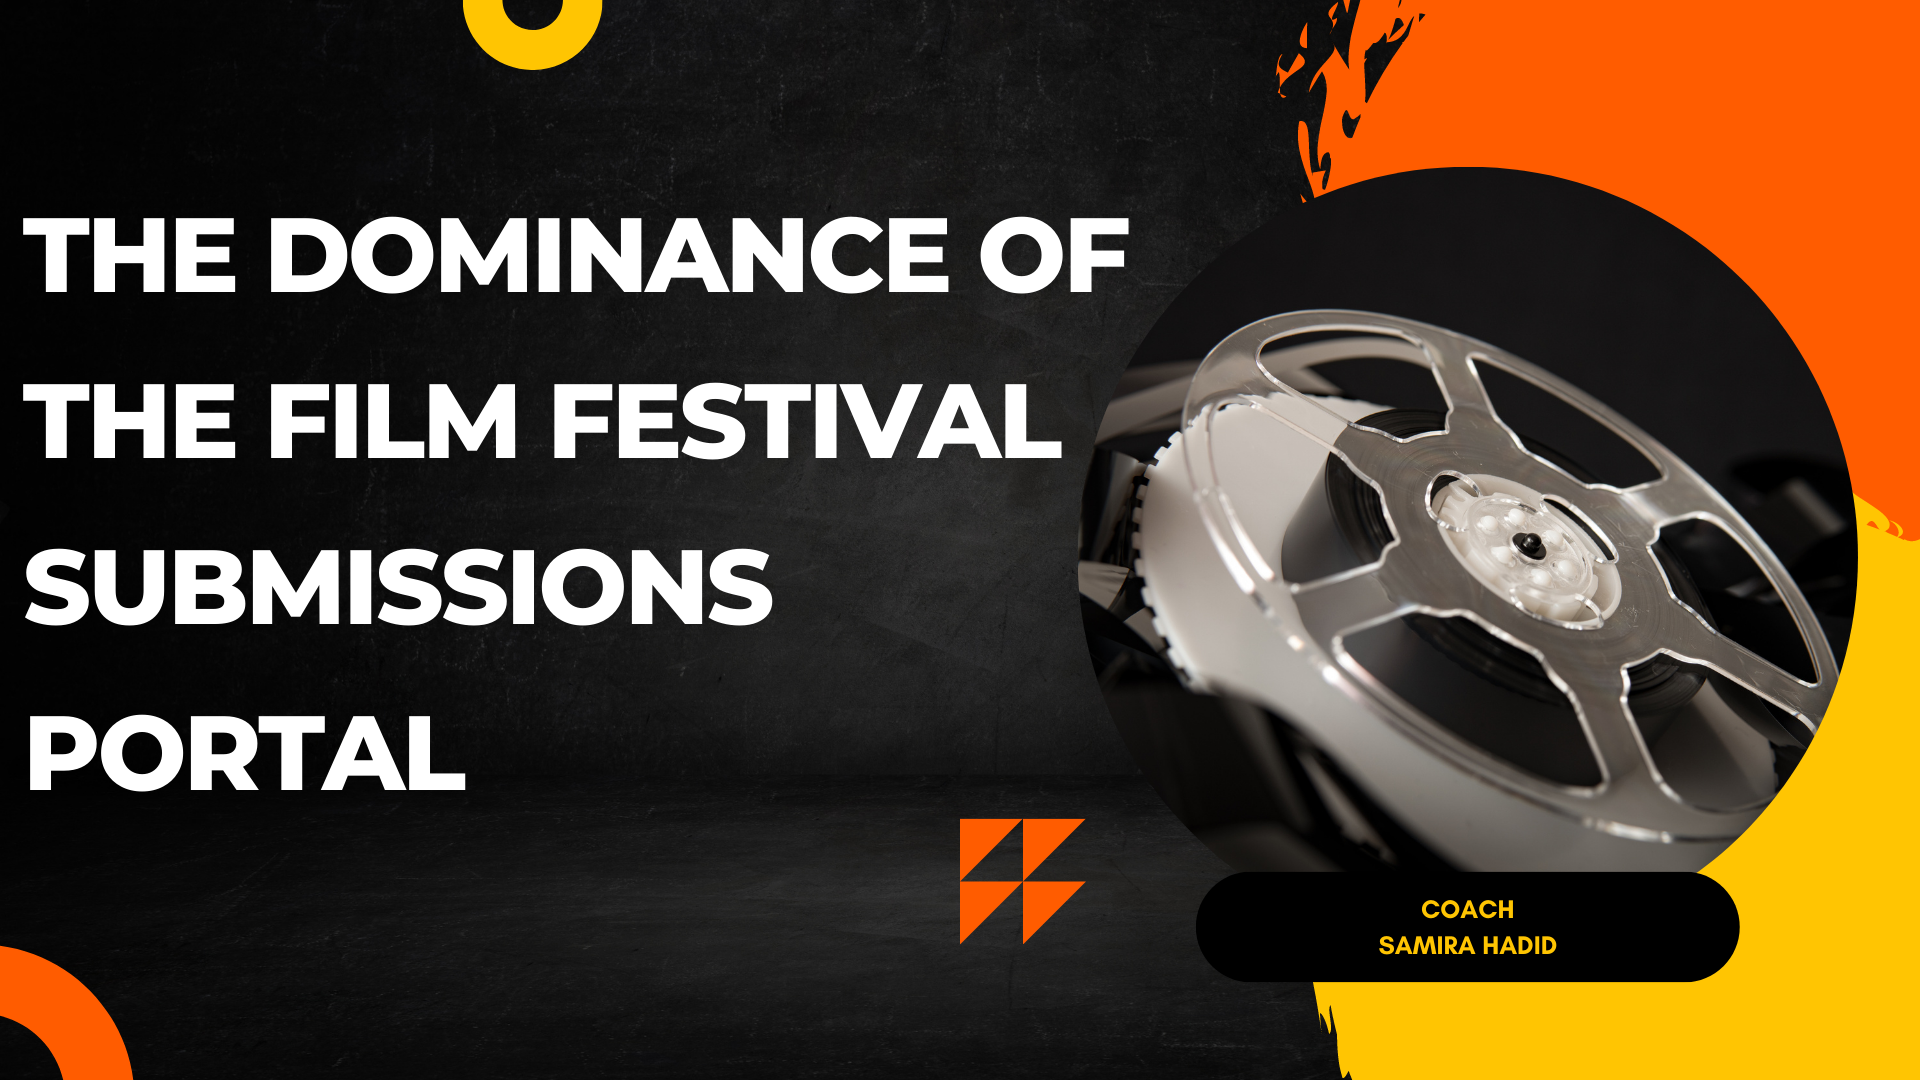 The dominance of the film festival submissions portal